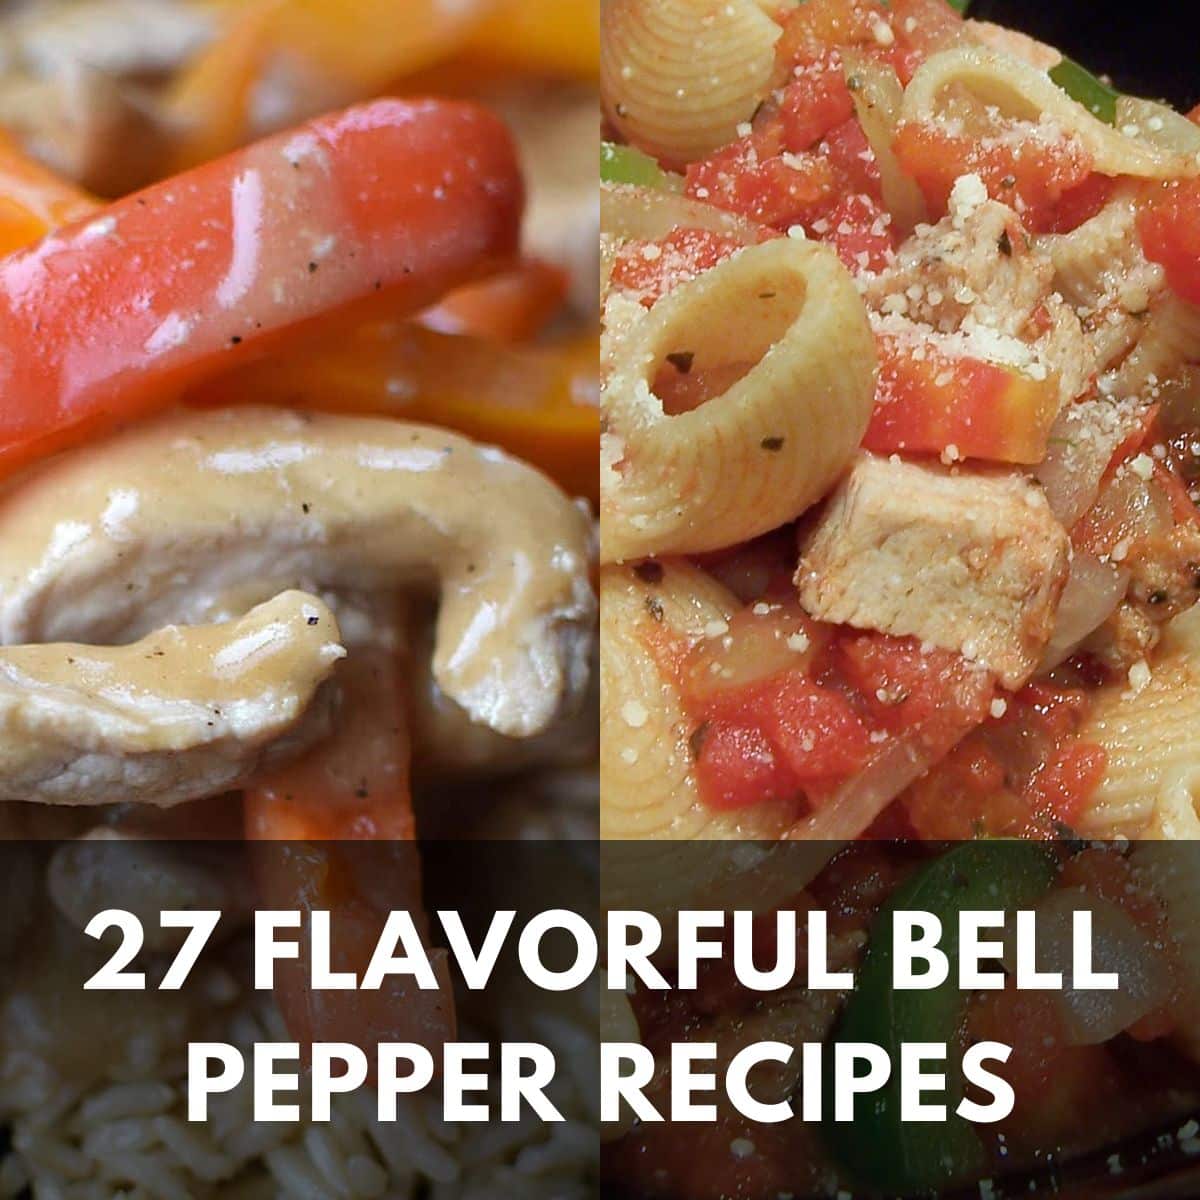 27 flavorful bell pepper recipes main